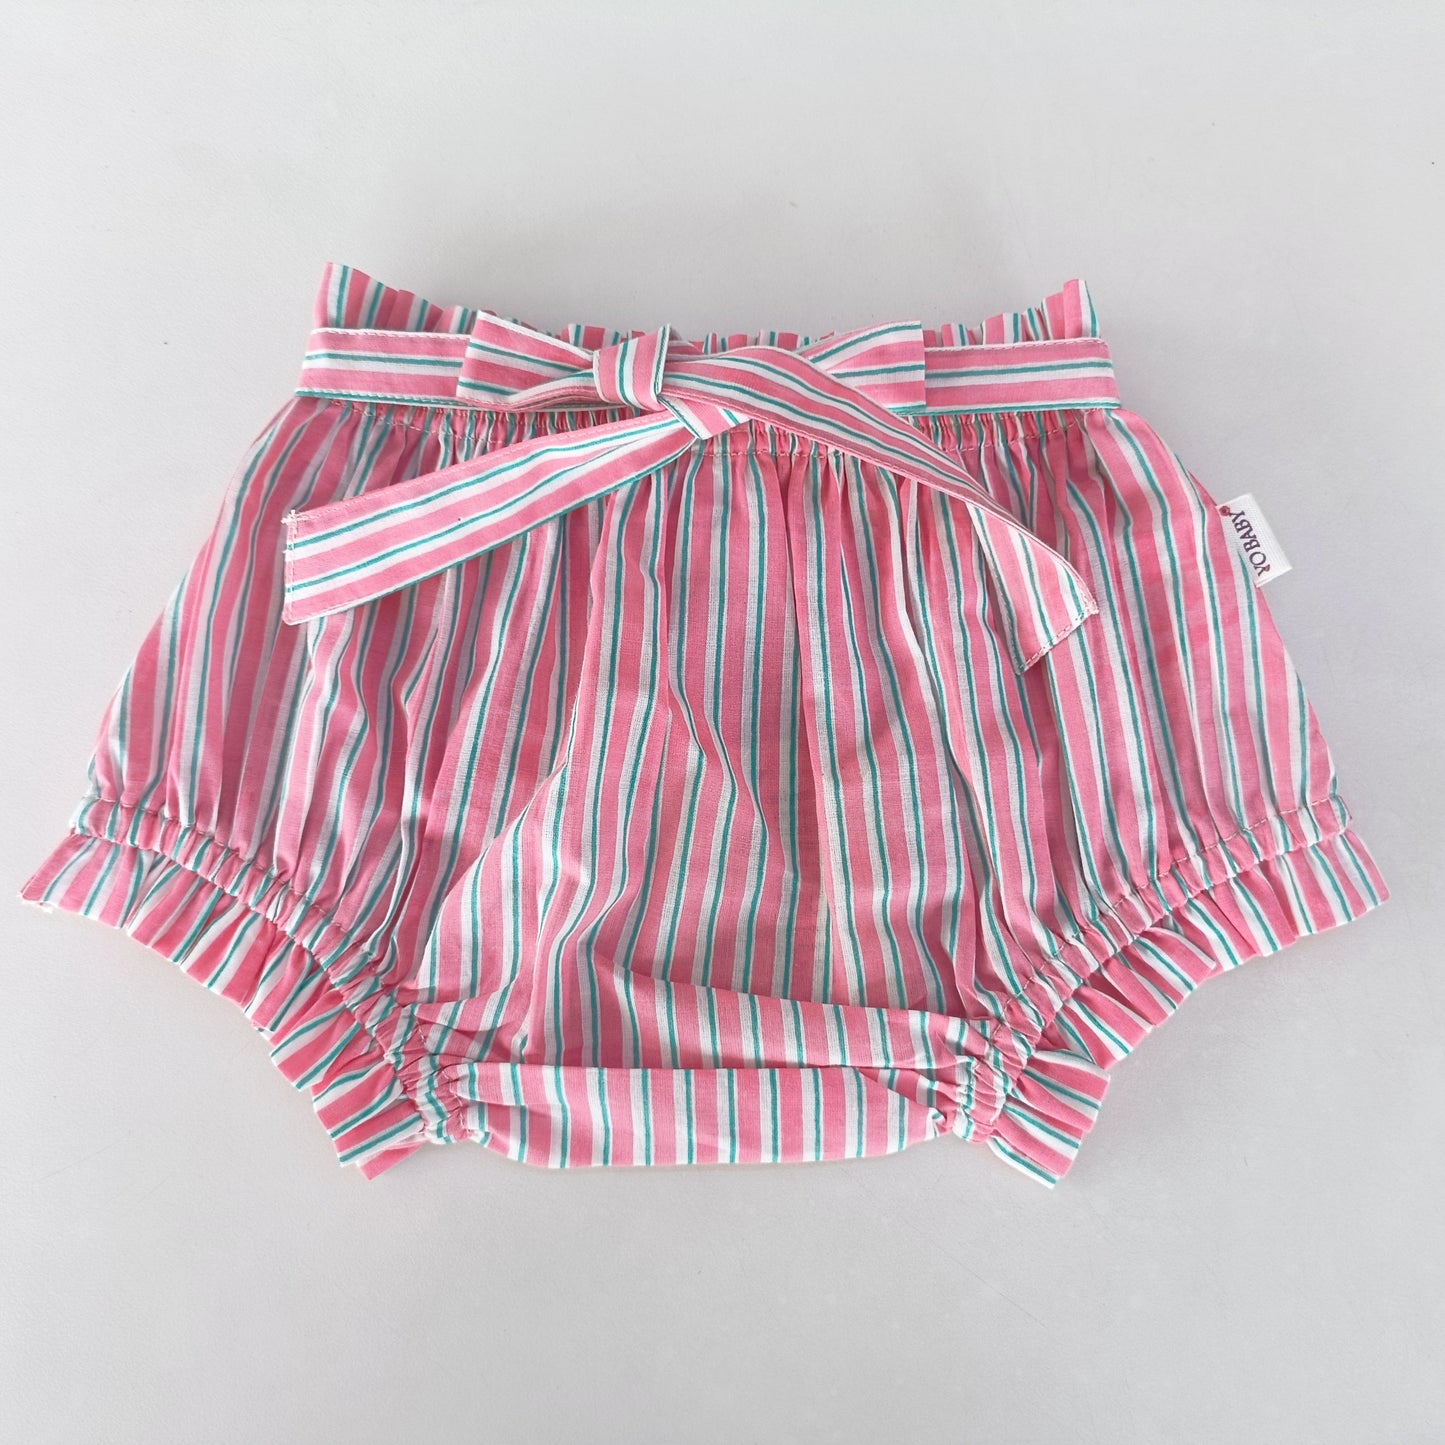 Pink Striped Print Shorts-Style Diaper Cover With Belt